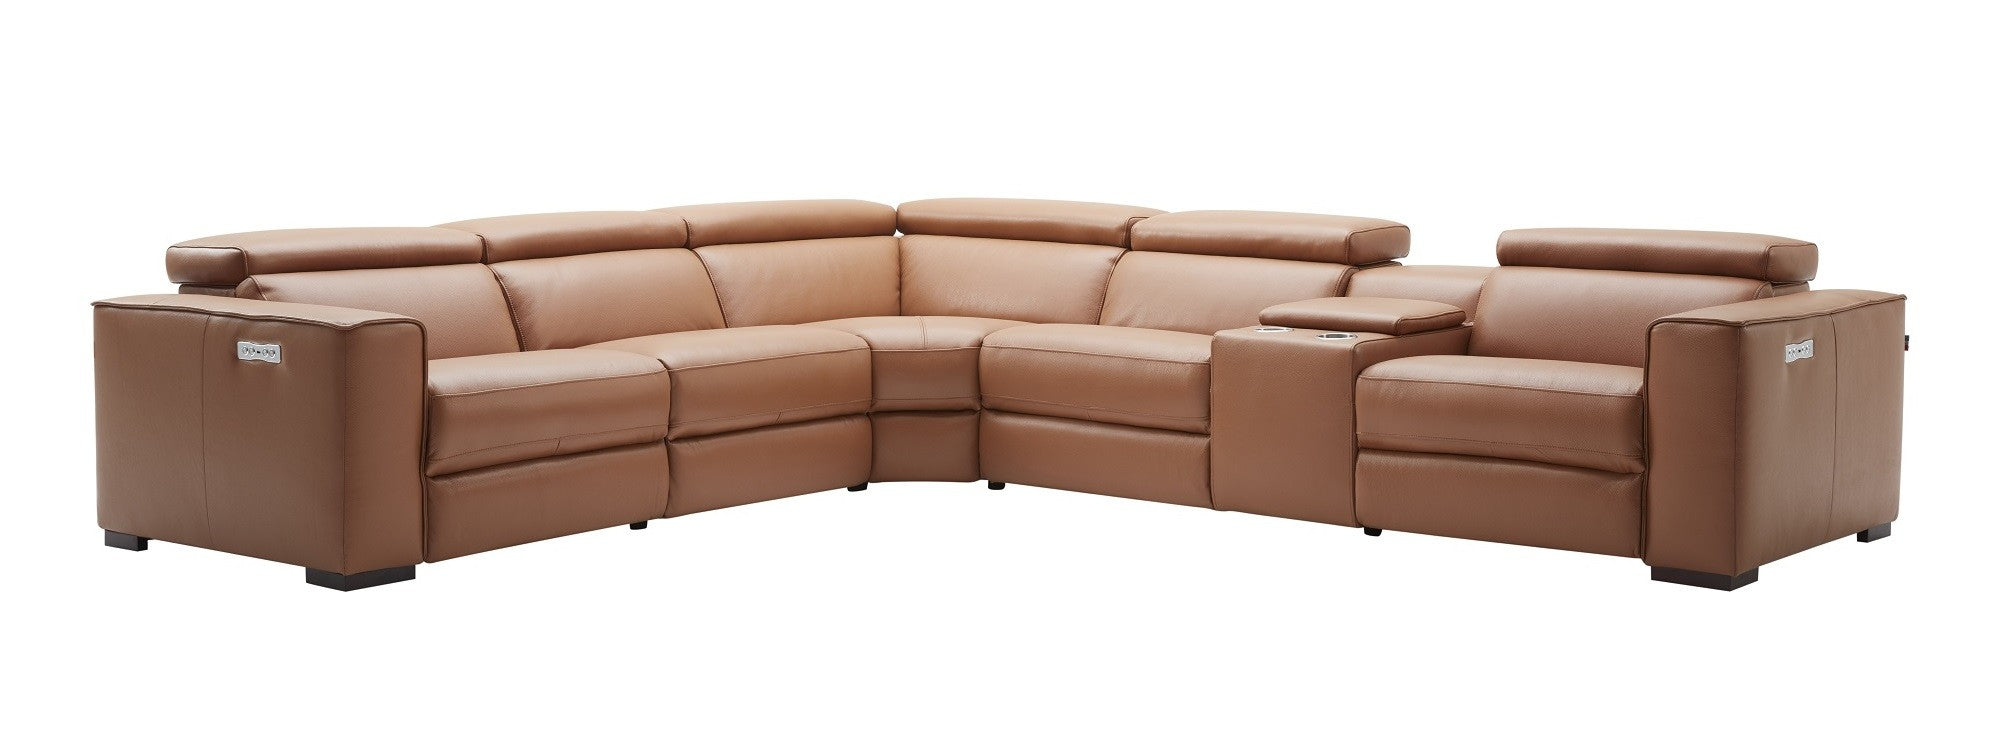 J&M Furniture Picasso 6Pc Motion Sectional (SKU18865)